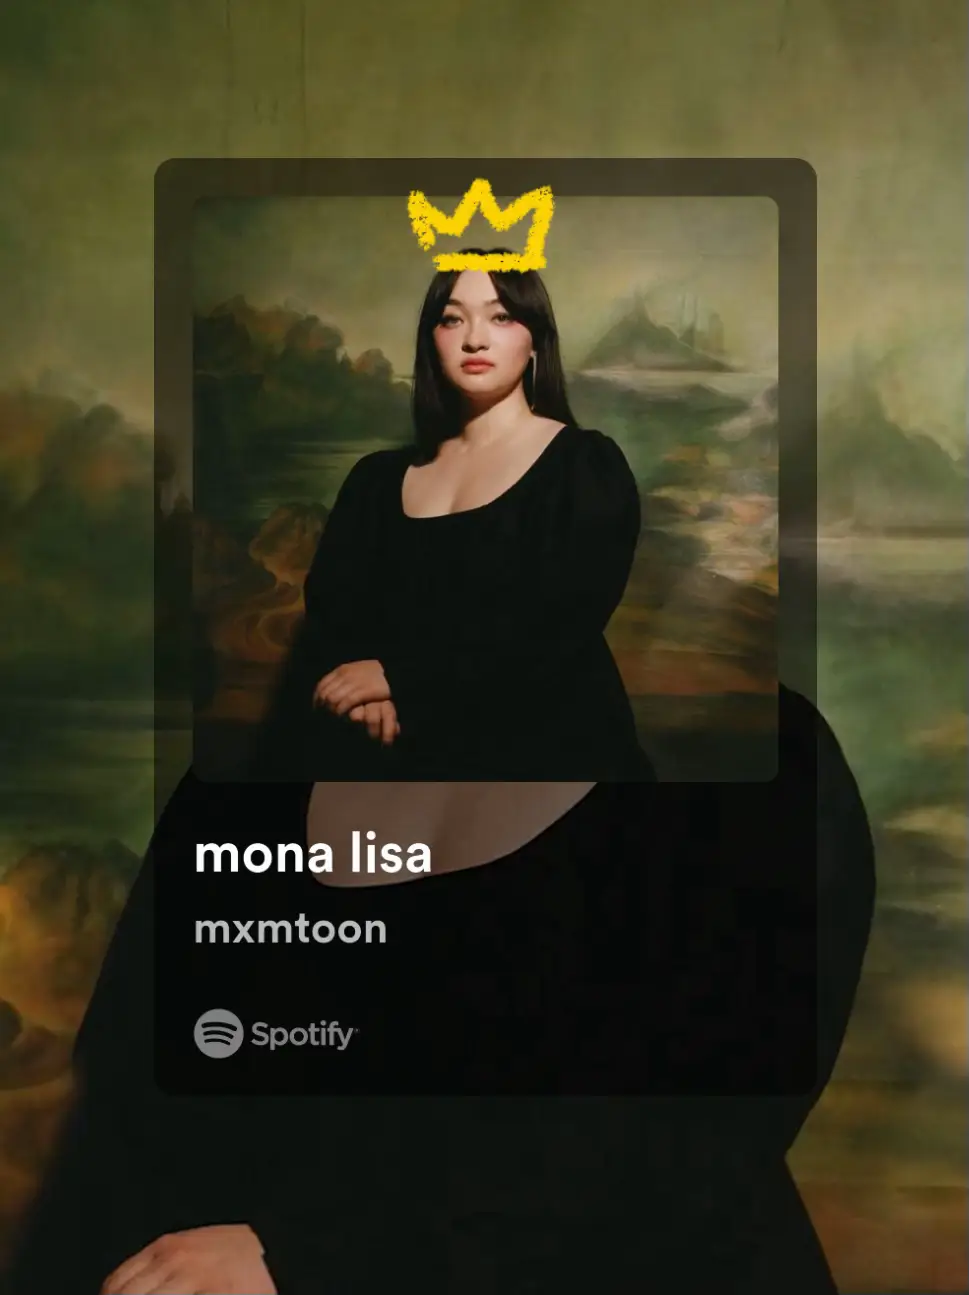  A Spotify ad for Mona Lisa with a crown on it.